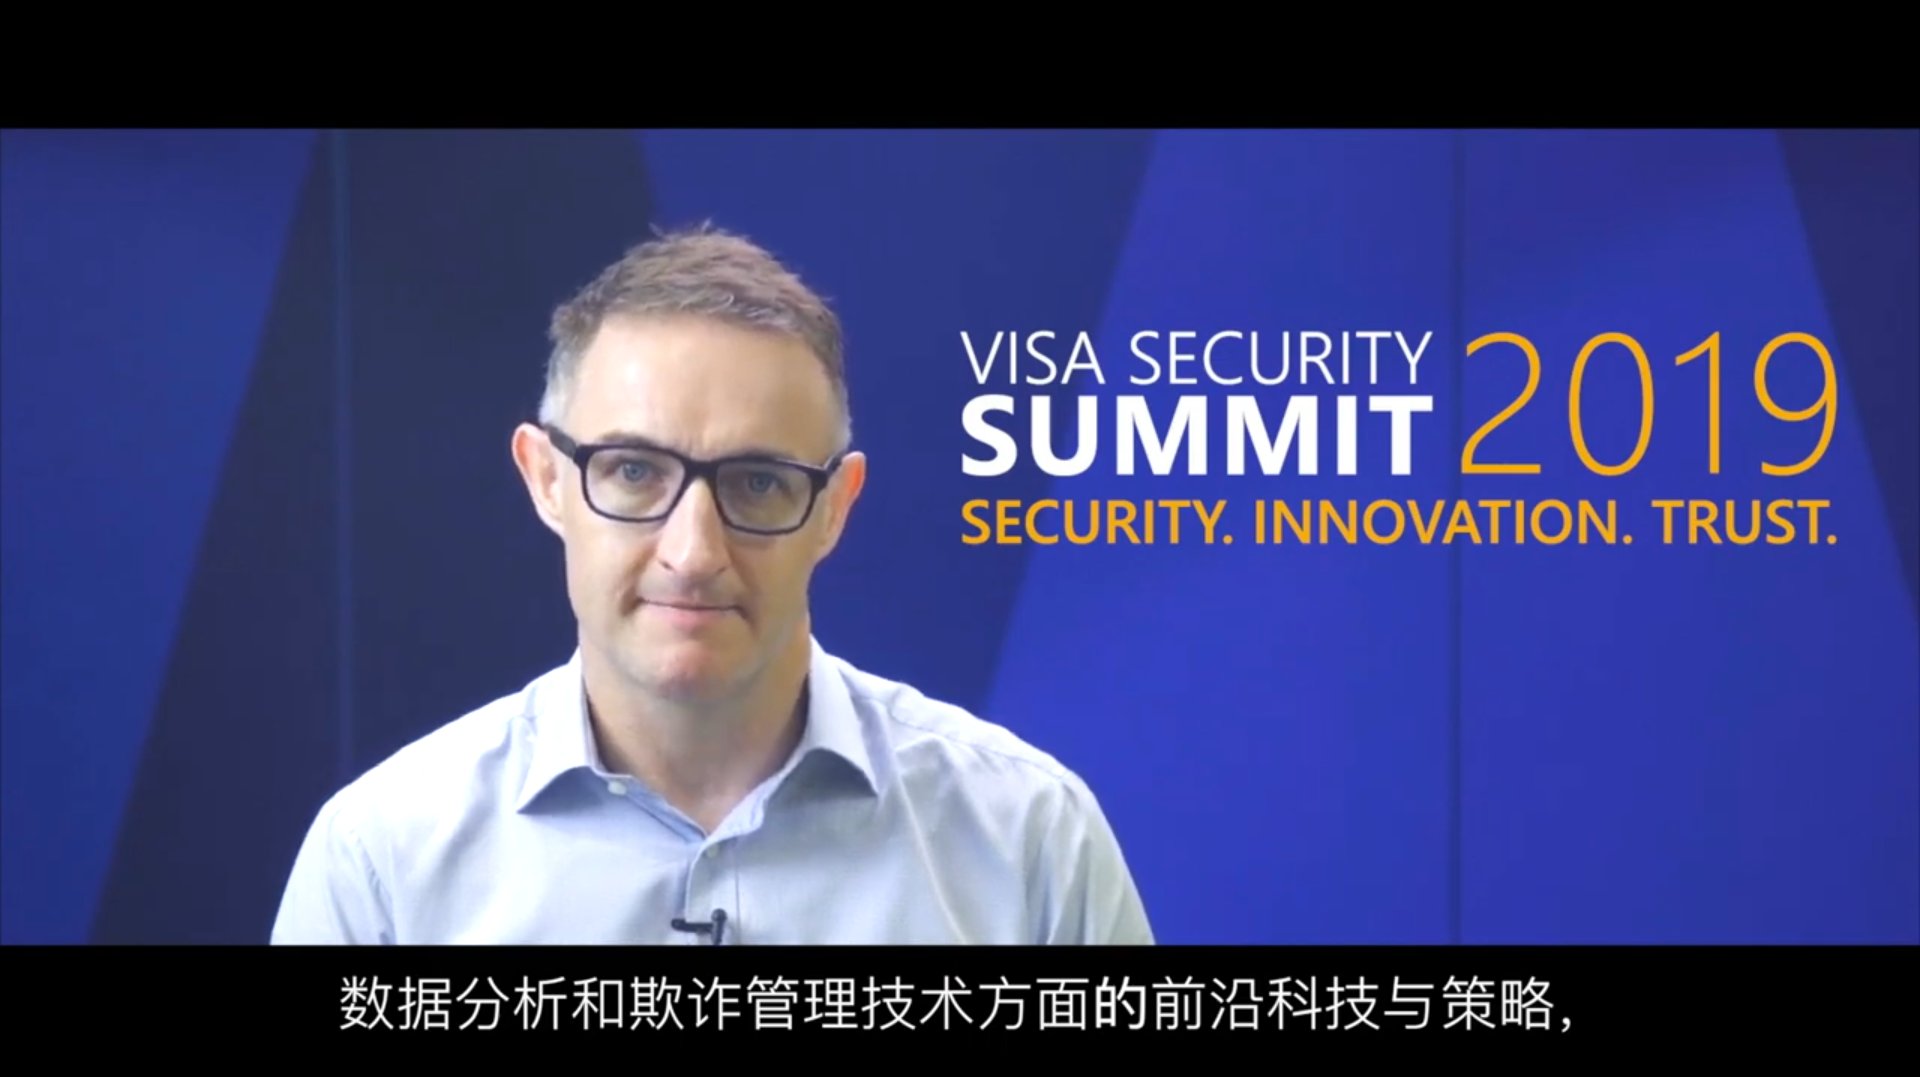 Joe Cunningham with the event name Visa Security Summit 2019, words security, innovation, trust below it, and Chinese subtitles on screen. 